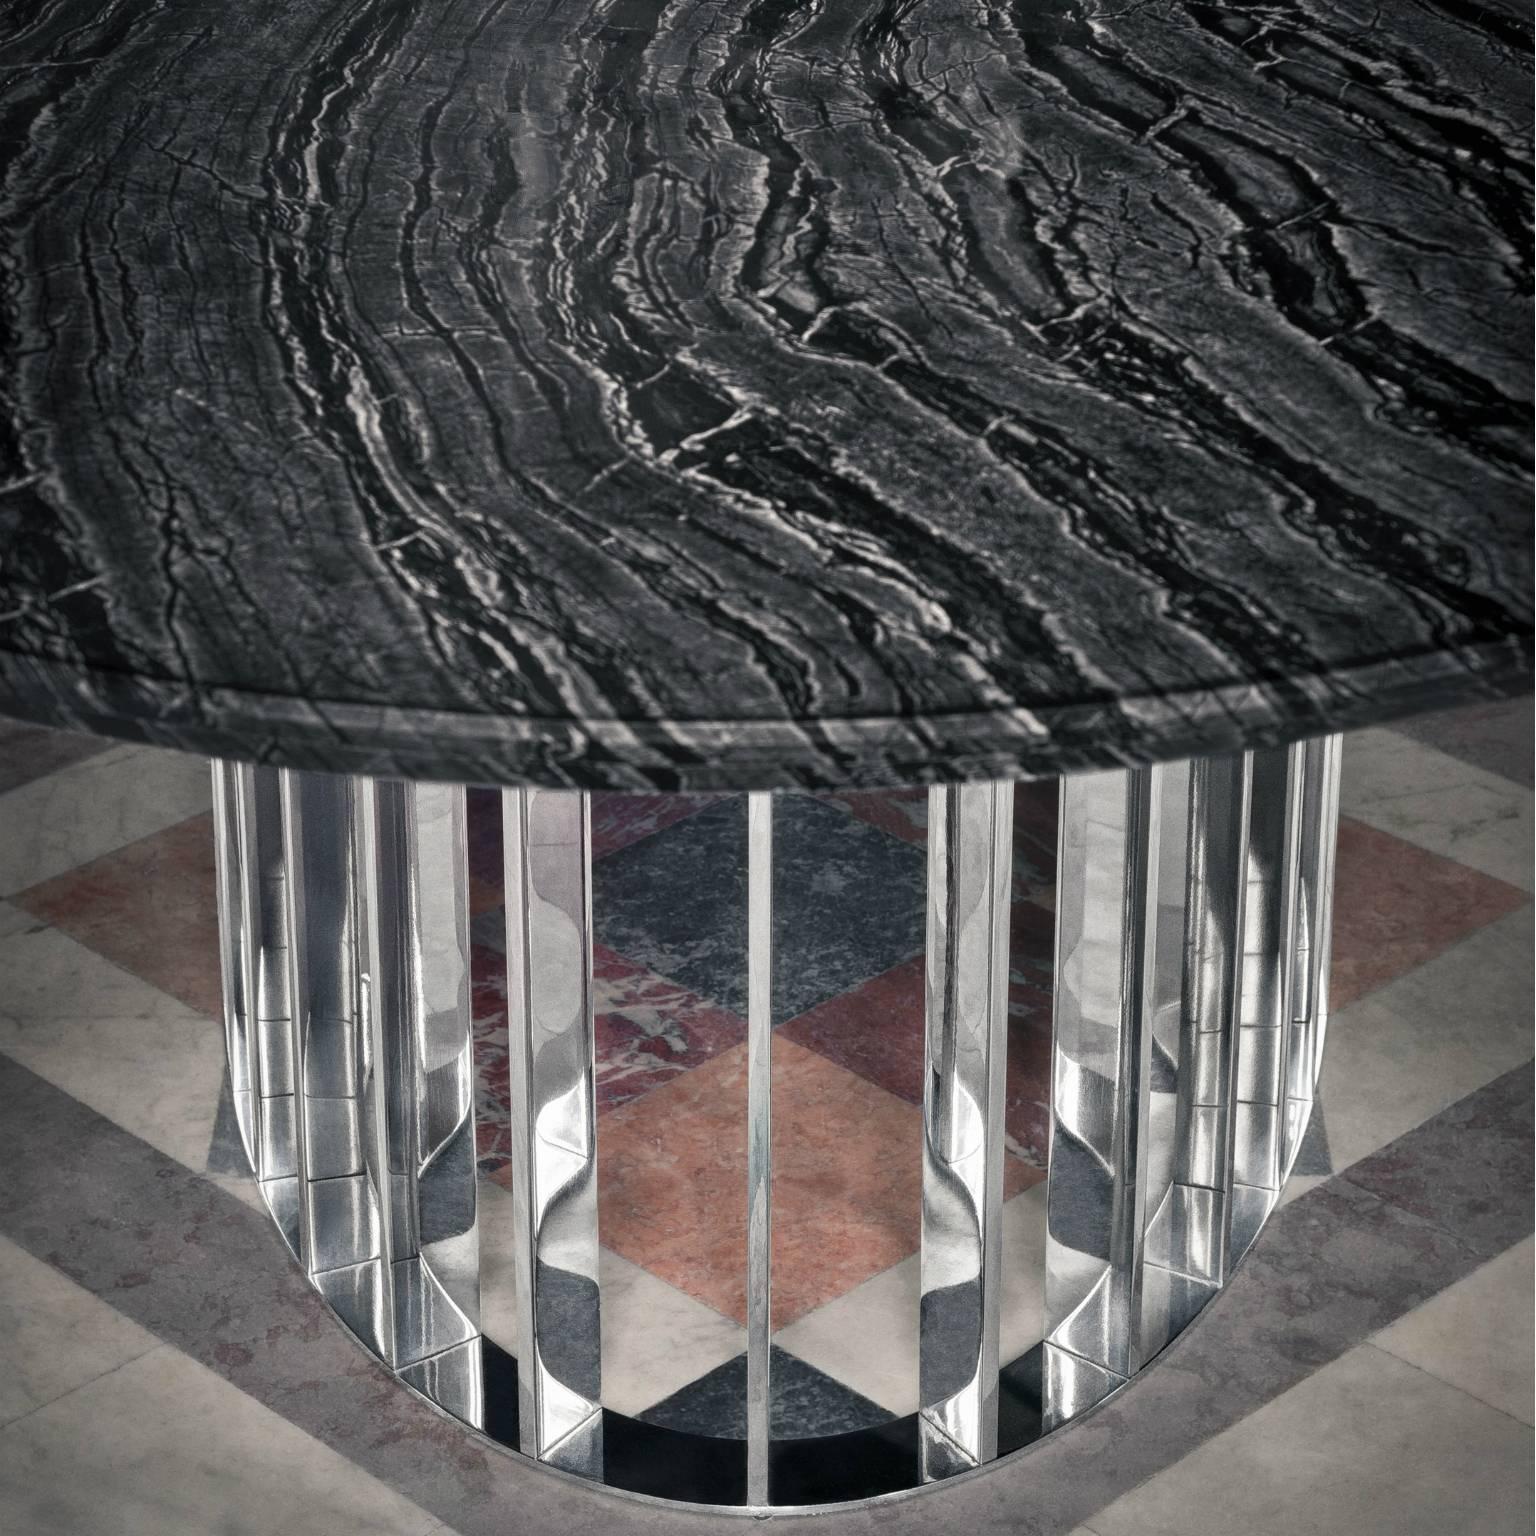 The OH table’s oval shape, available in different dimensions in order to be adaptable to the needs of each space, becomes the ideal canvas to showcase the marble’s rich veins, deep texture and smooth finish. The metallic element of the base